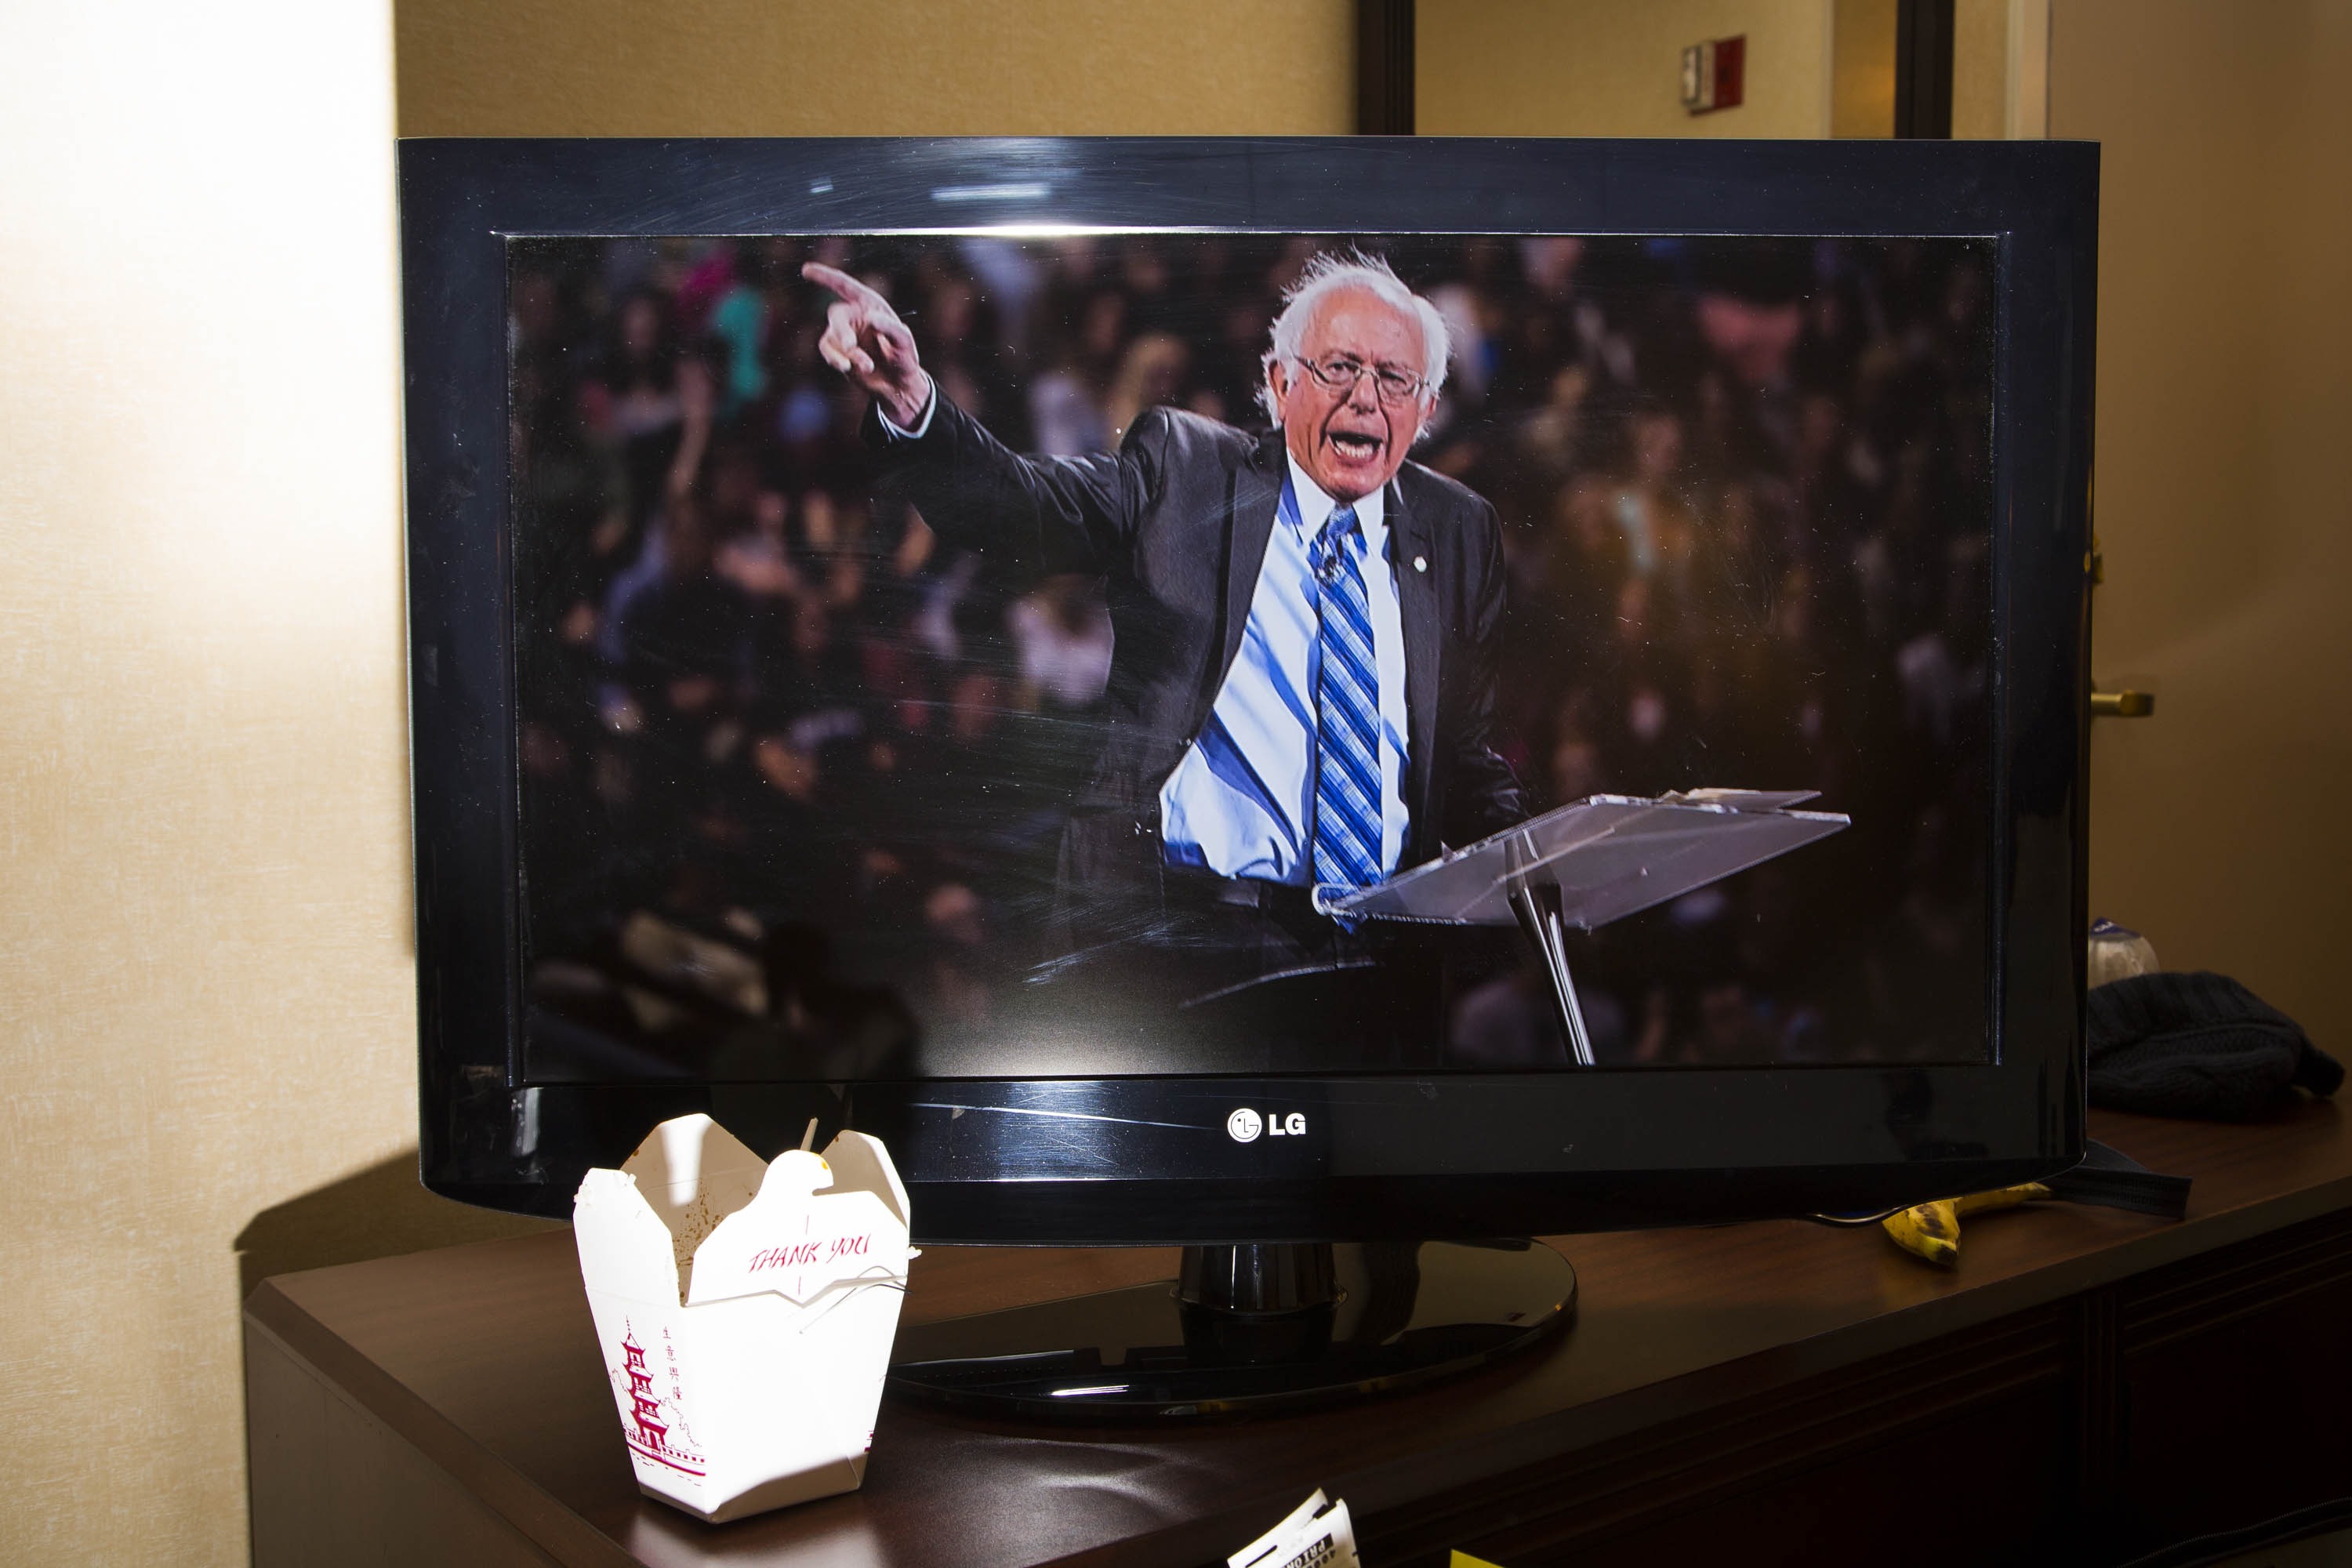 A television screen displays Democratic presidential candidate, Vermont Sen. Bernie Sanders in a New Hampshire hotel.